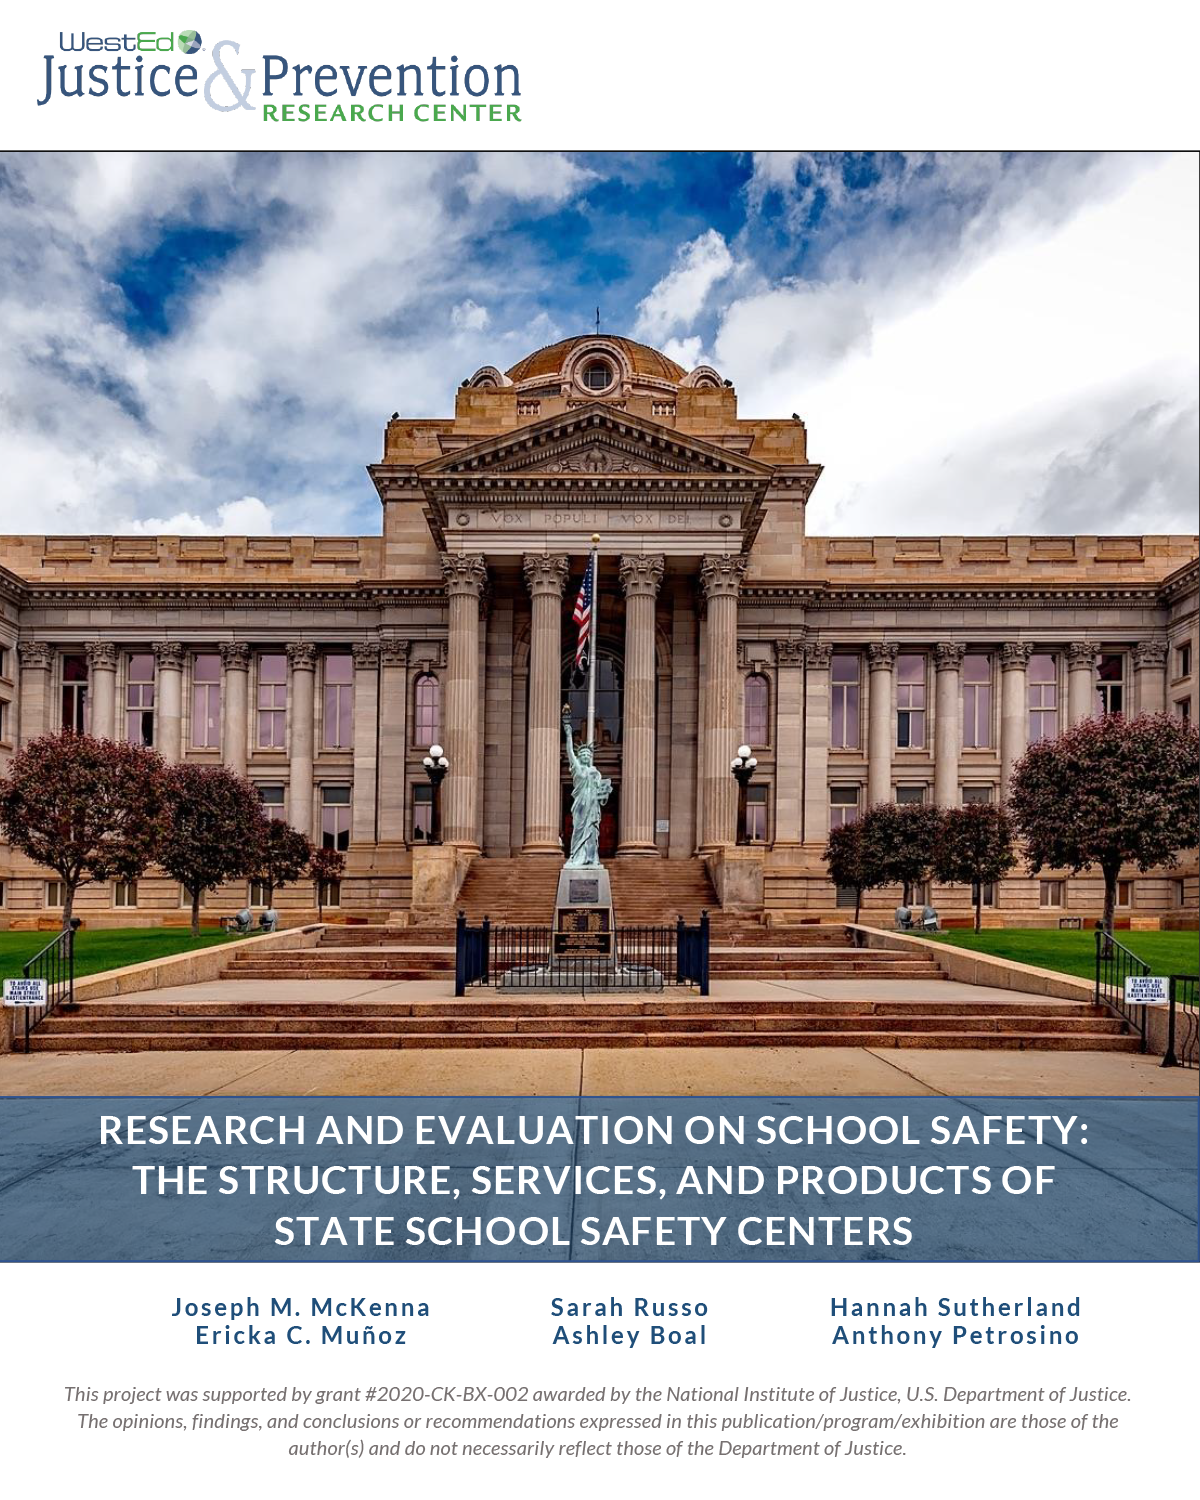 Research and Evaluation on School Safety: The Structure, Services, and Products of State School Safety Centers